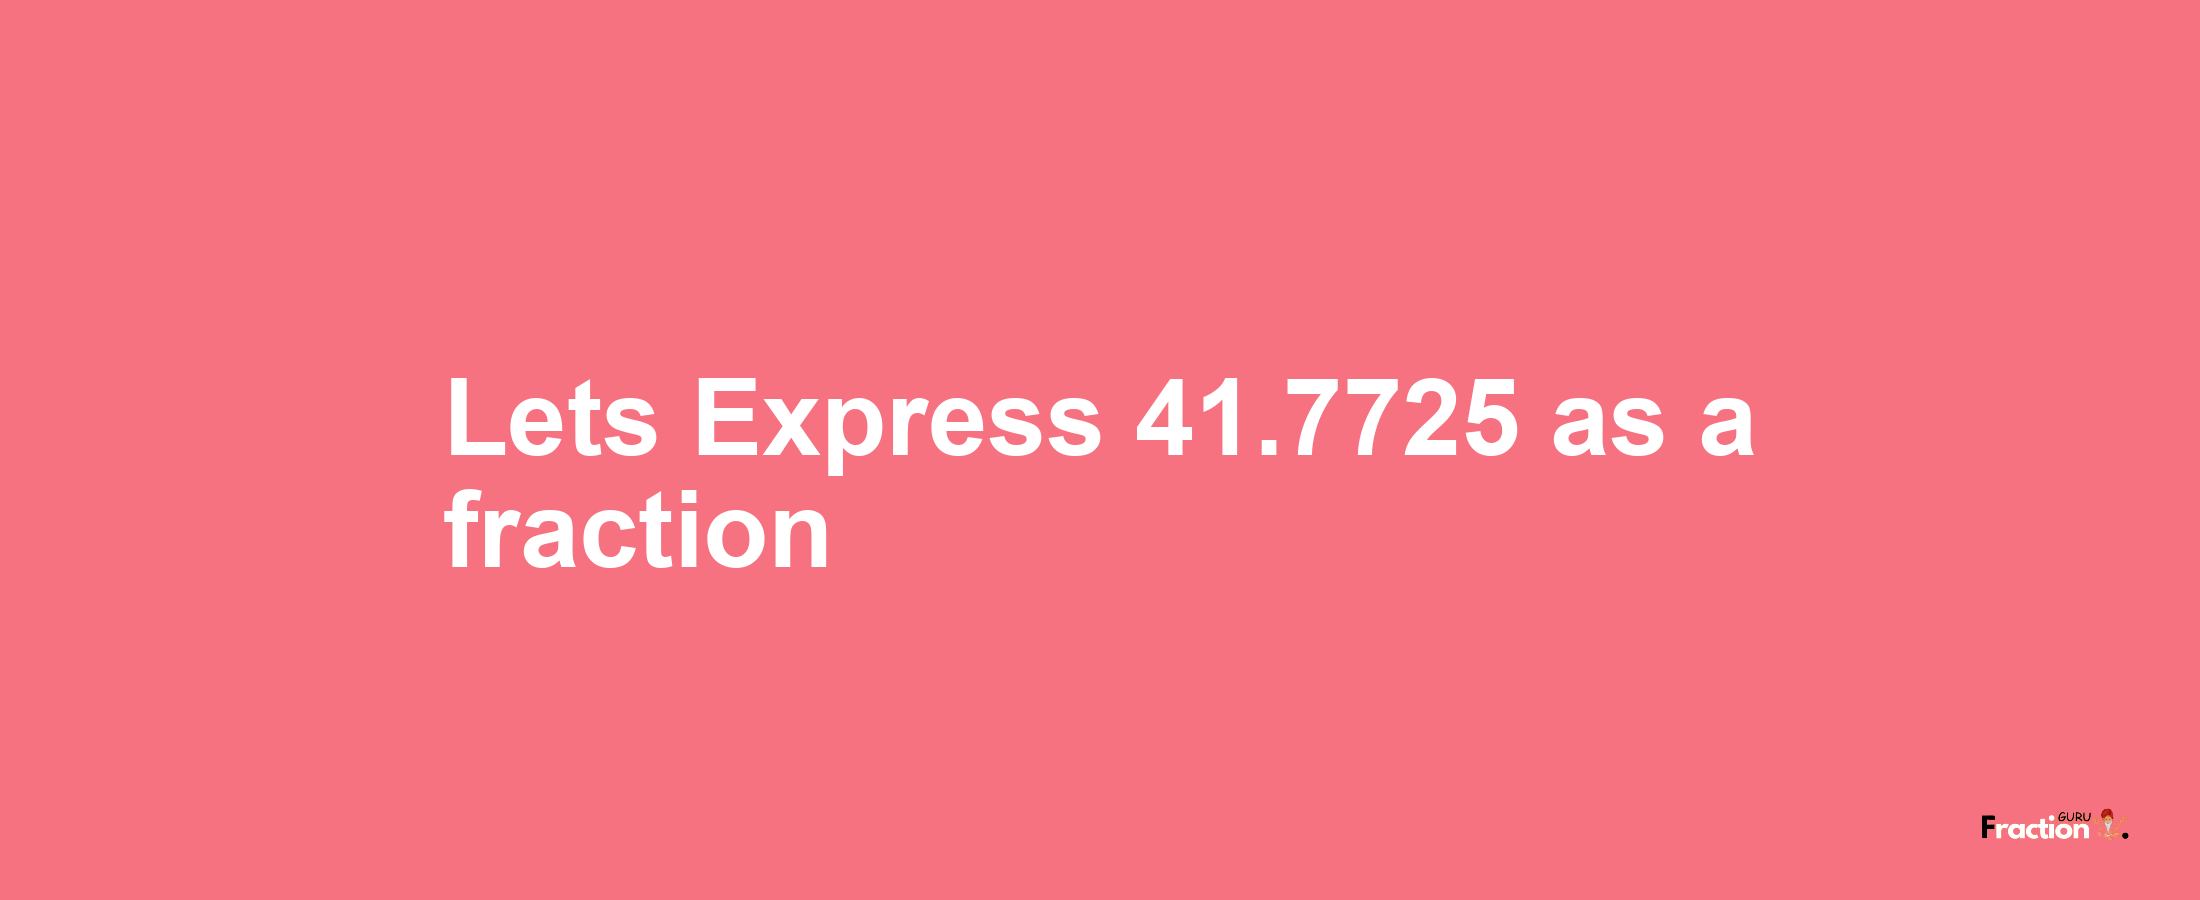 Lets Express 41.7725 as afraction